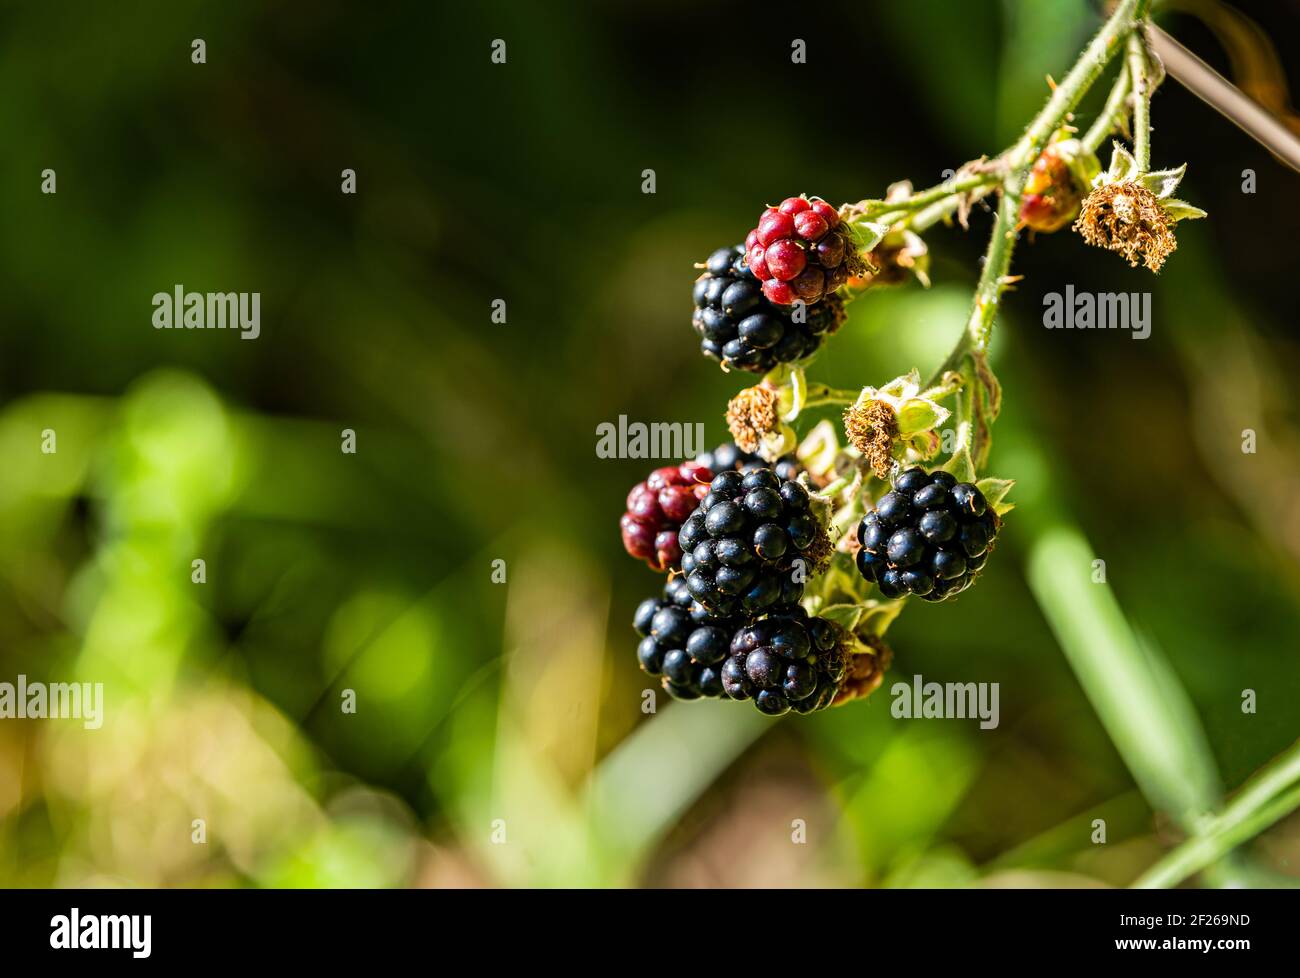 Ripe Blackberries with blurred background Stock Photo